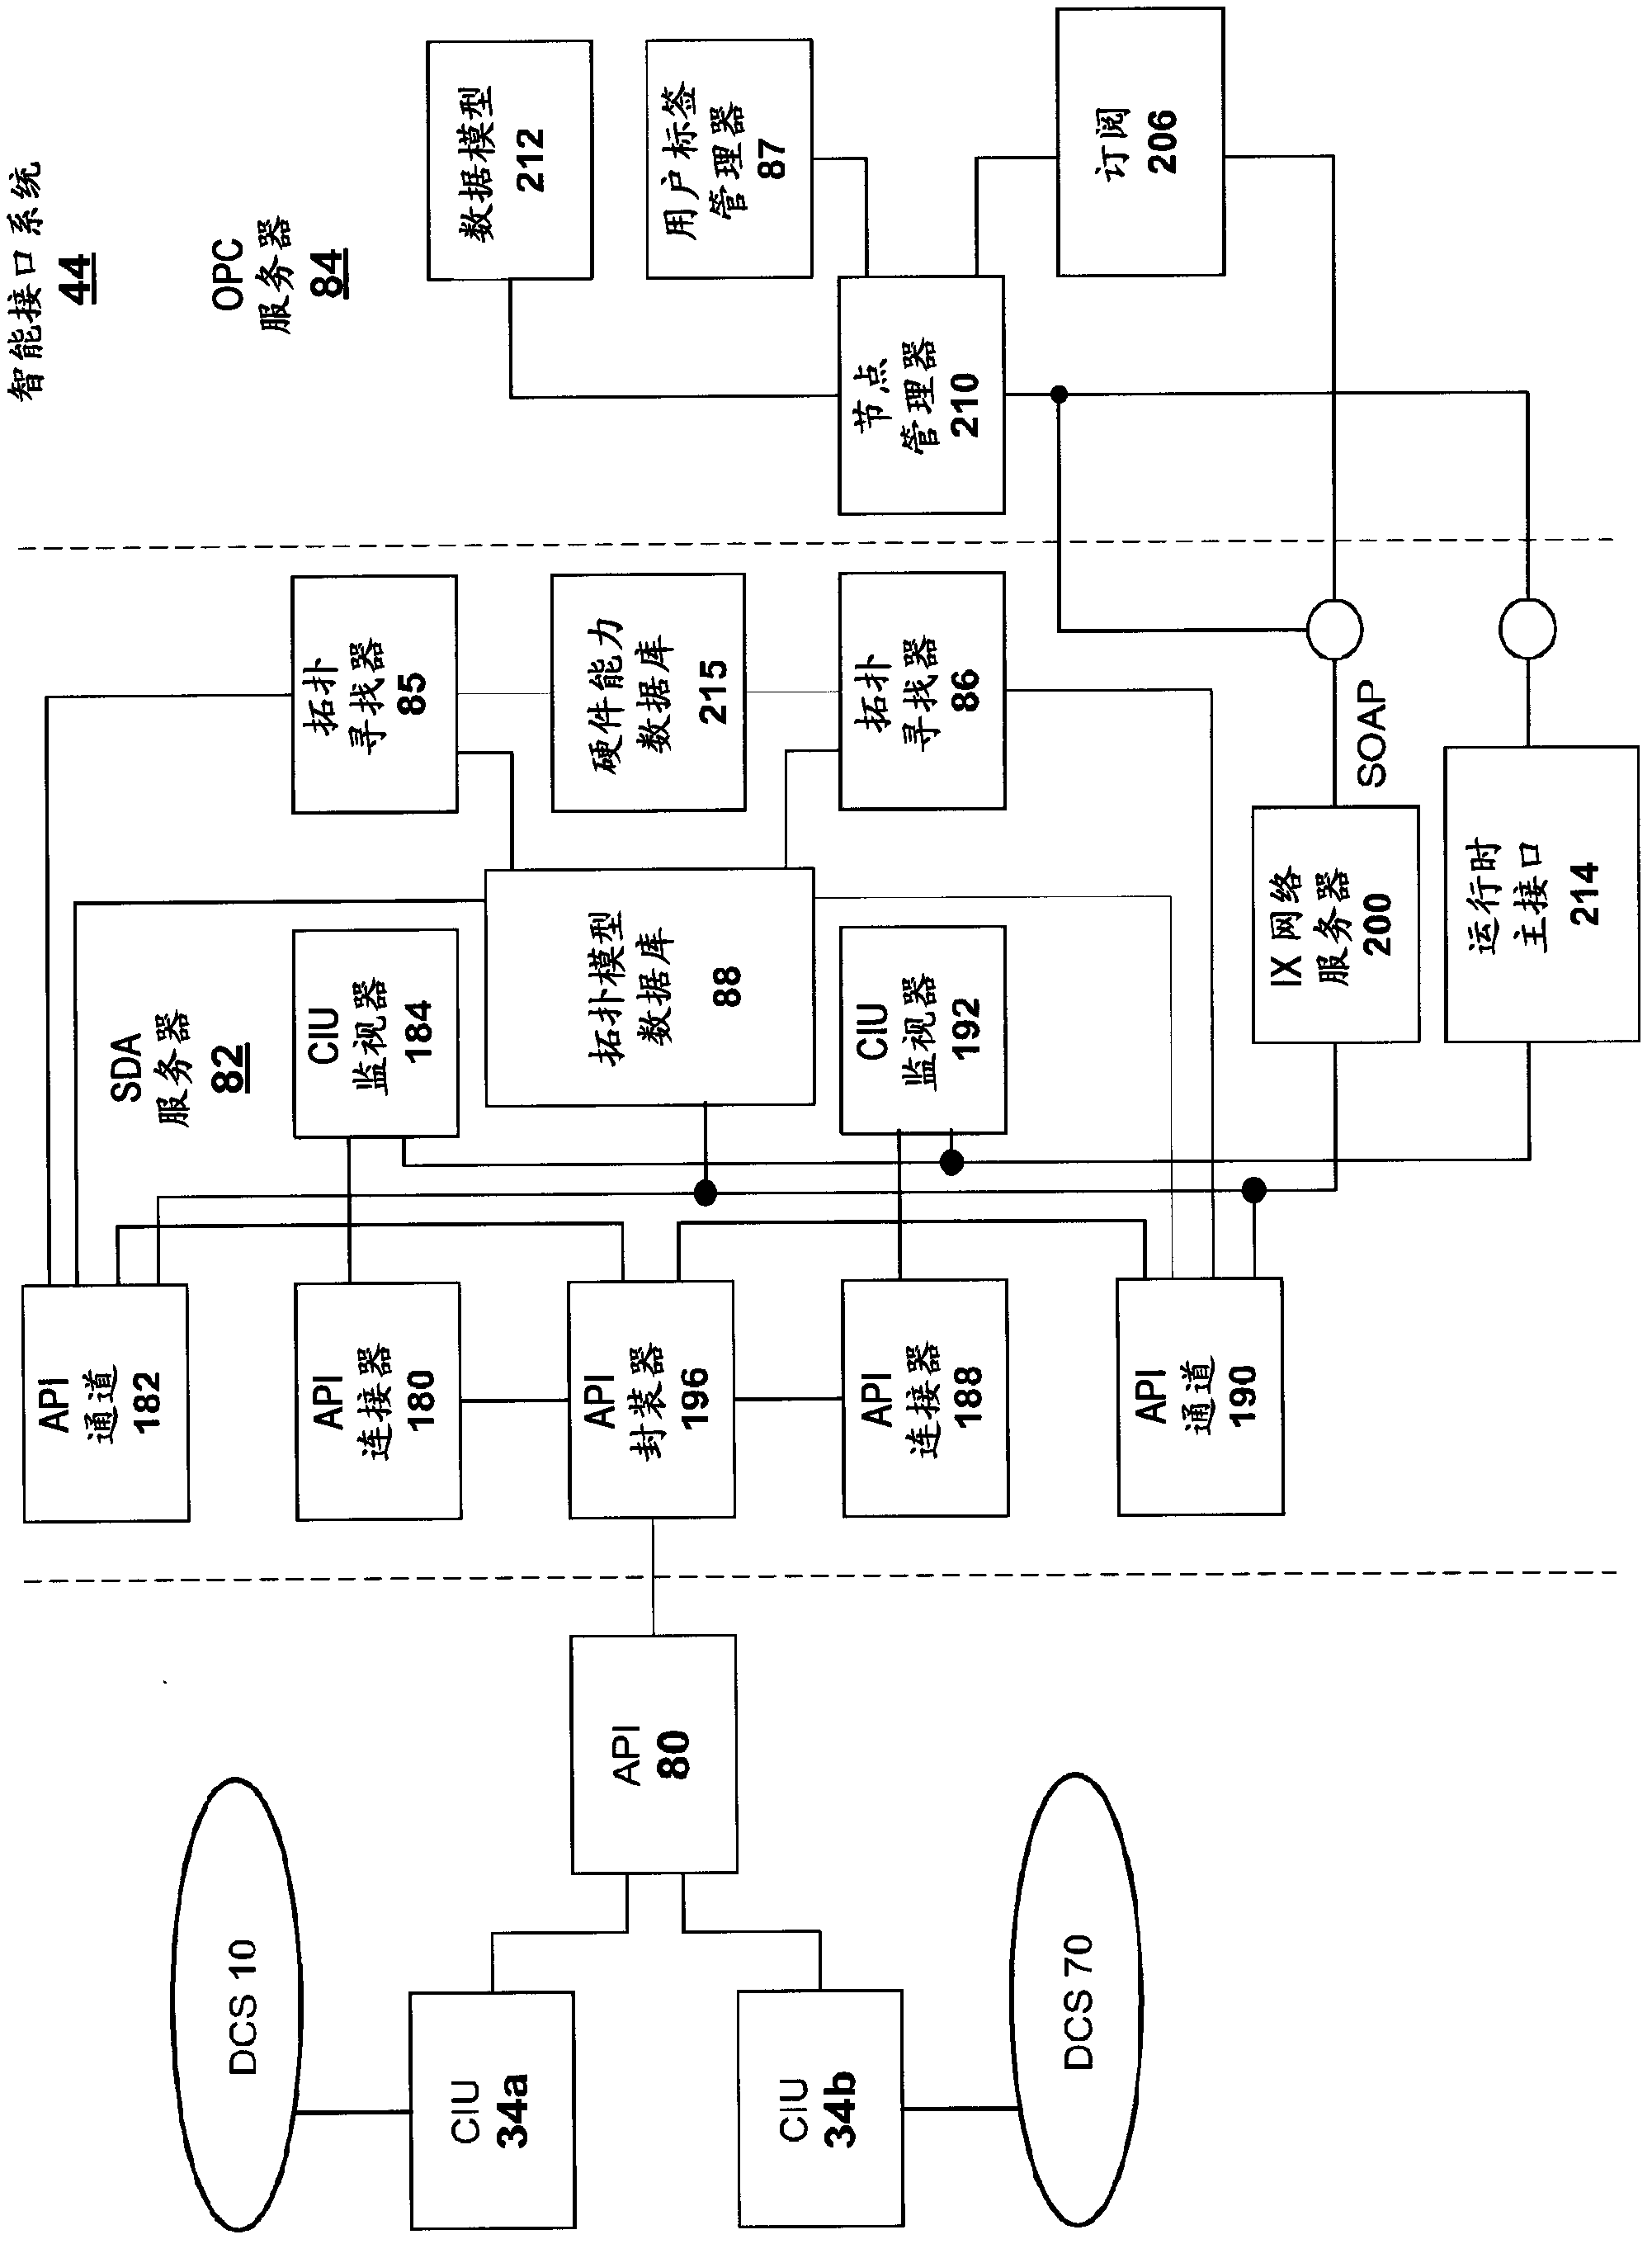 Intelligent interface for a distributed control system